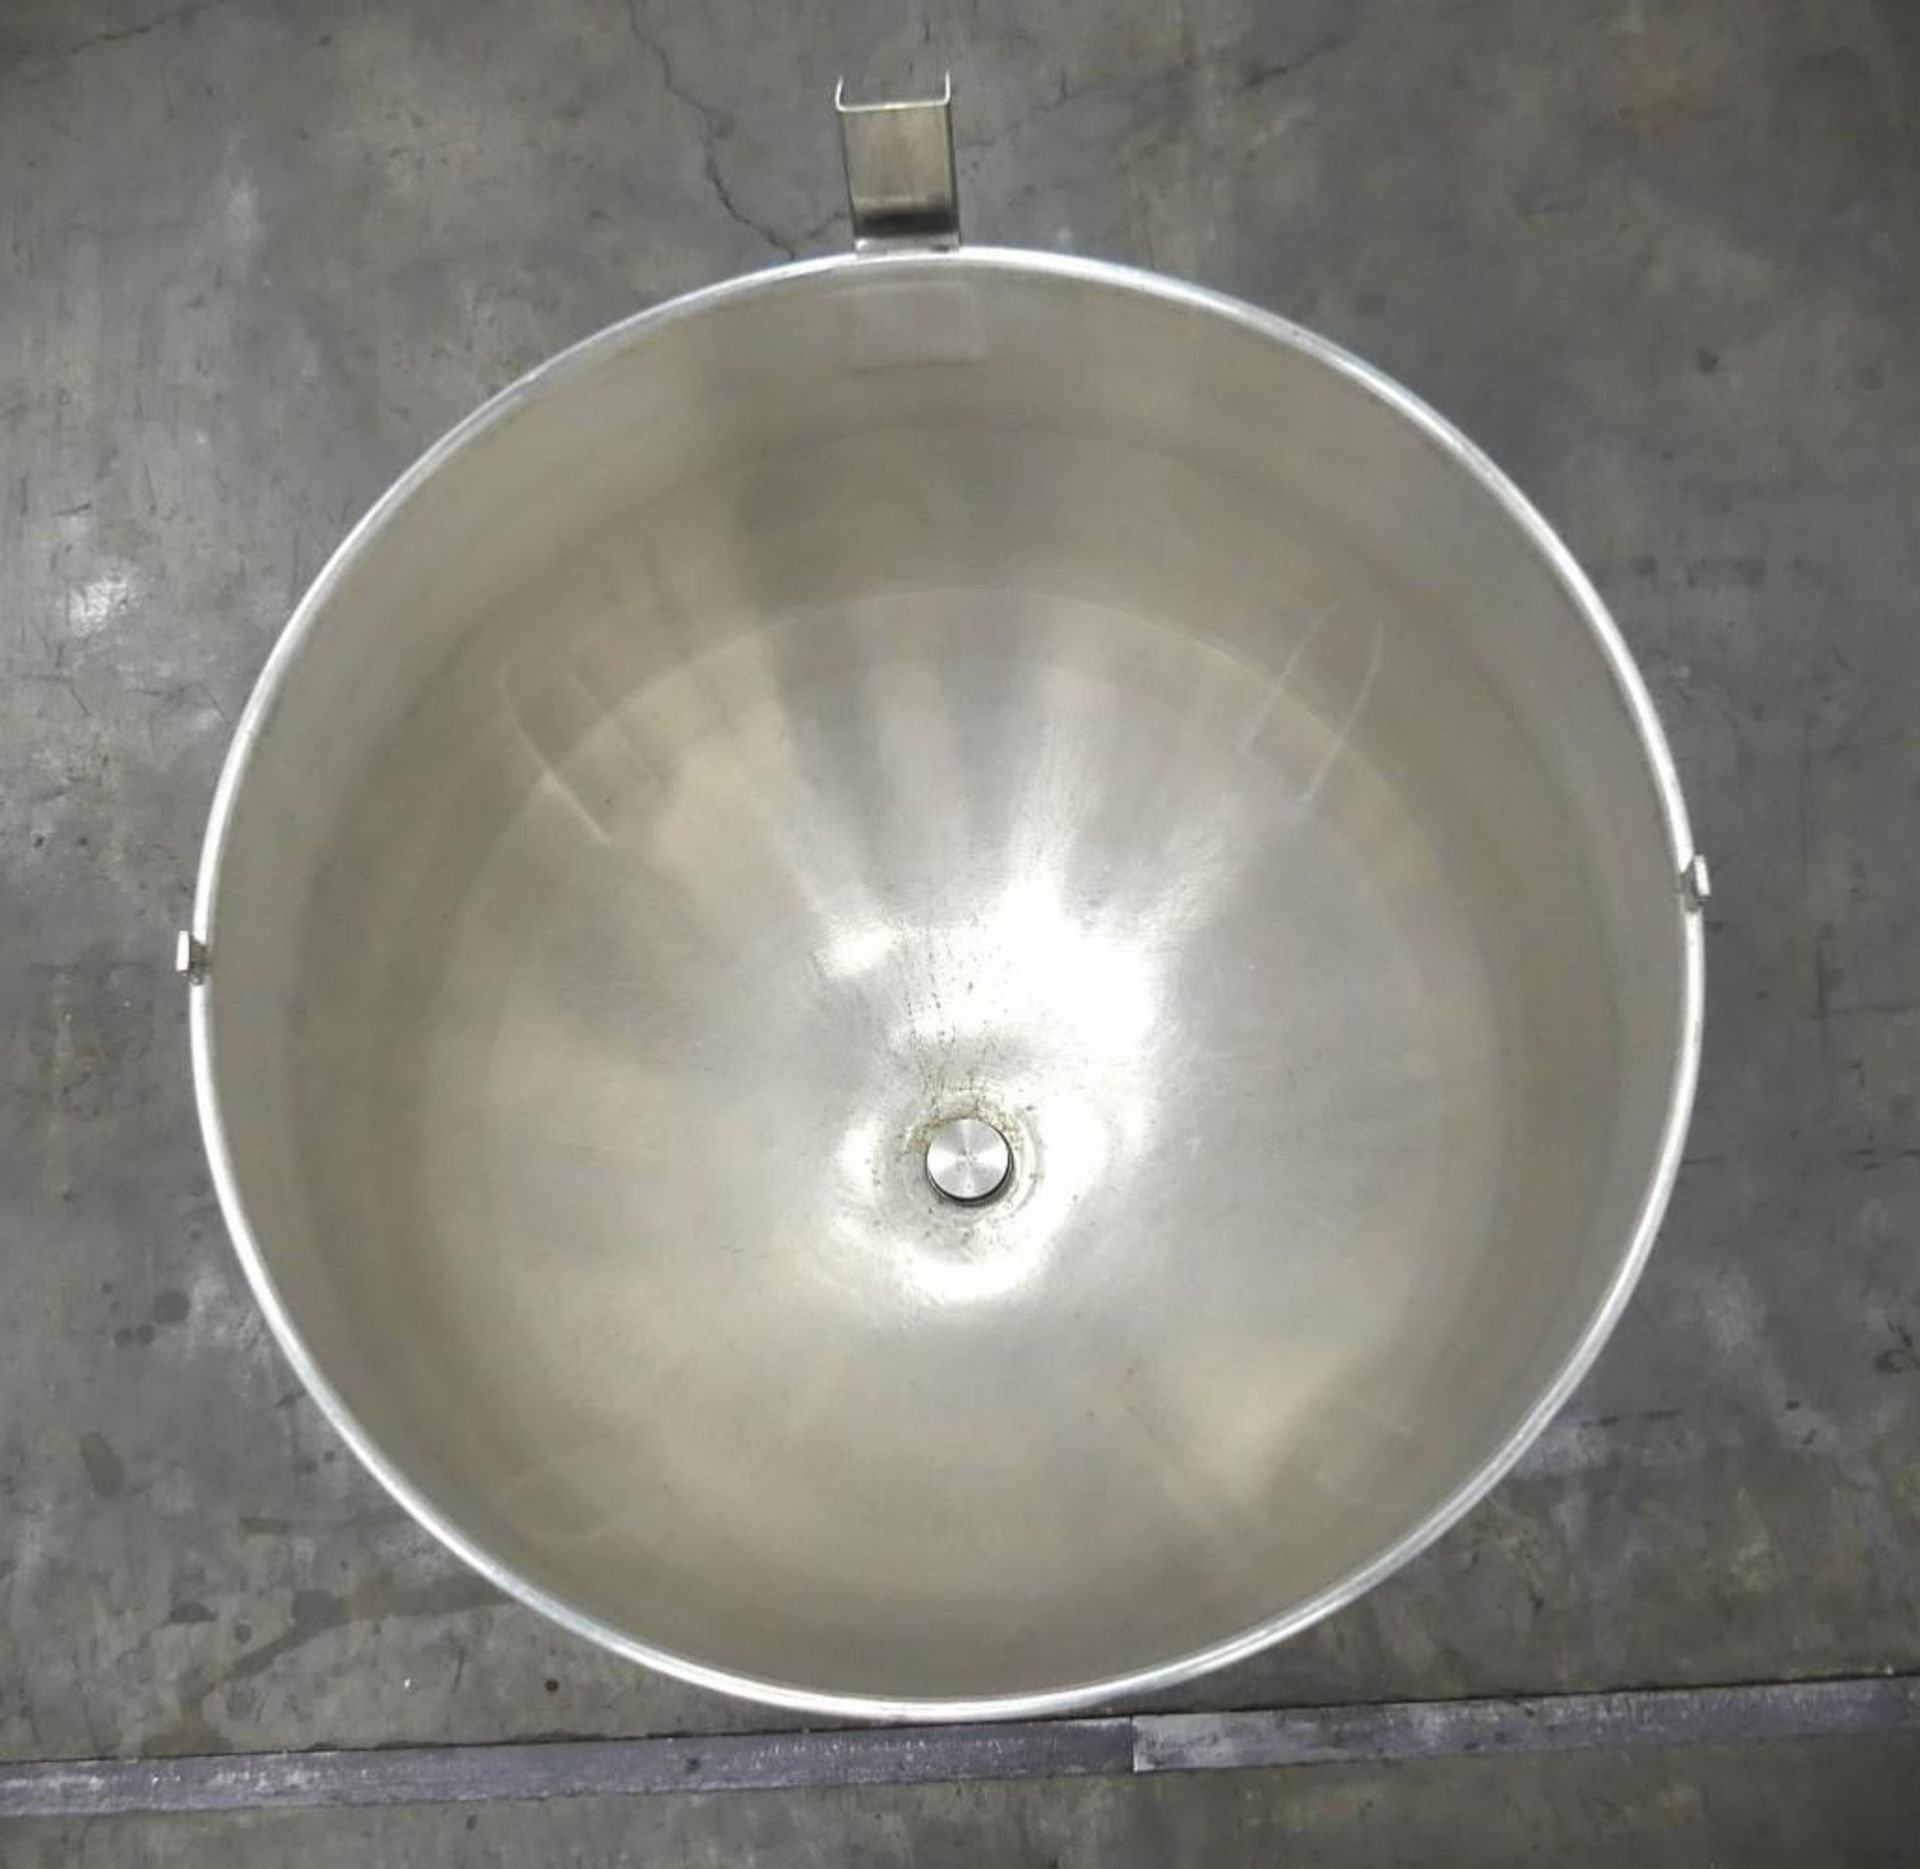 Lee Metal Product Co. Stainless Steel 300 Gallon Kettle - Image 4 of 9